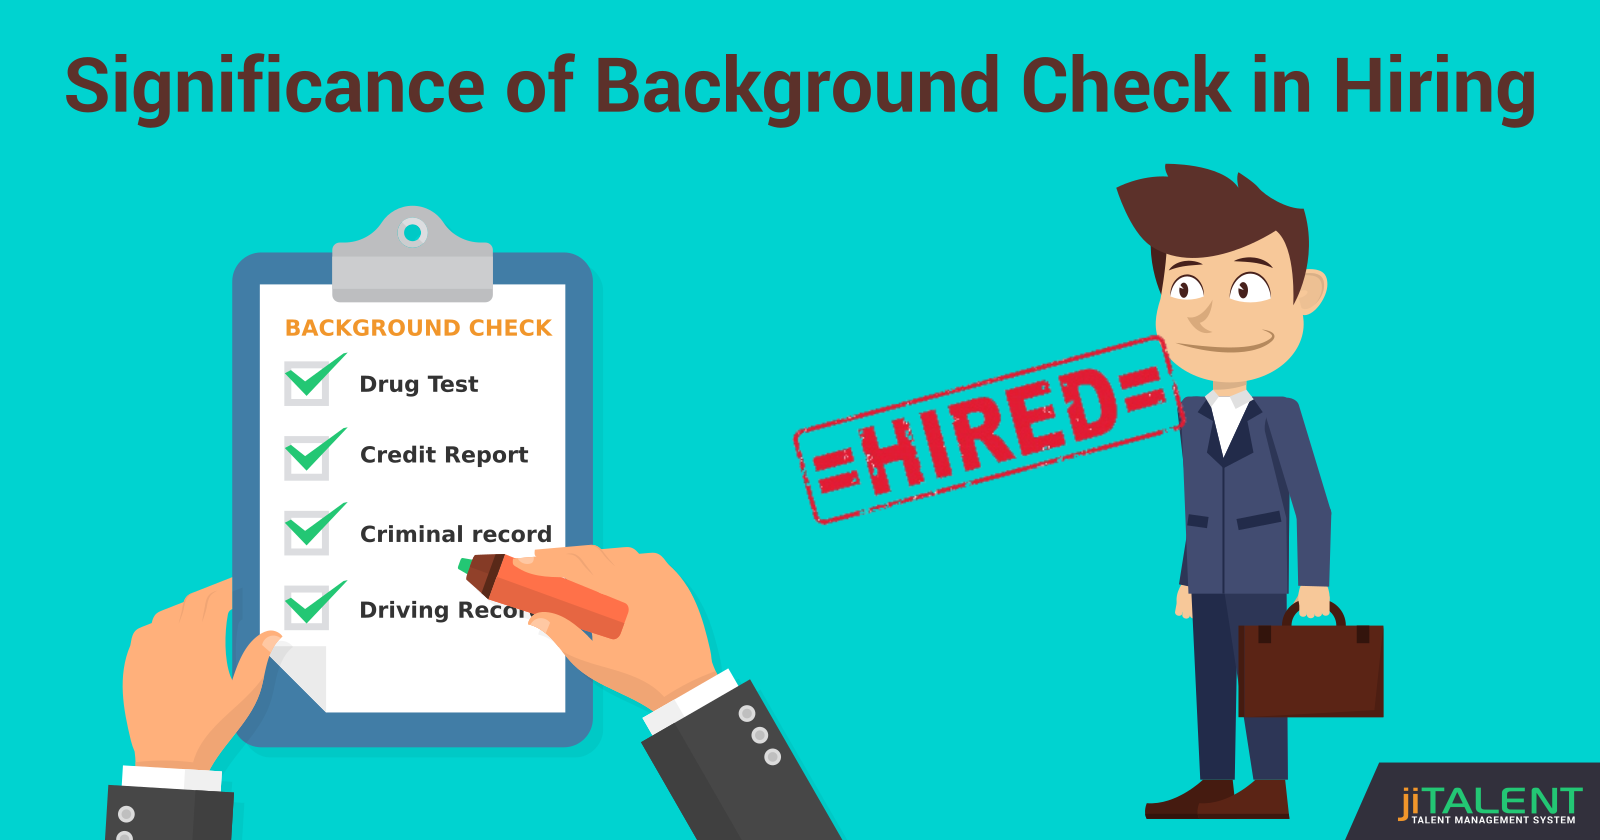 Why background Check is Important for Efficient Hiring?